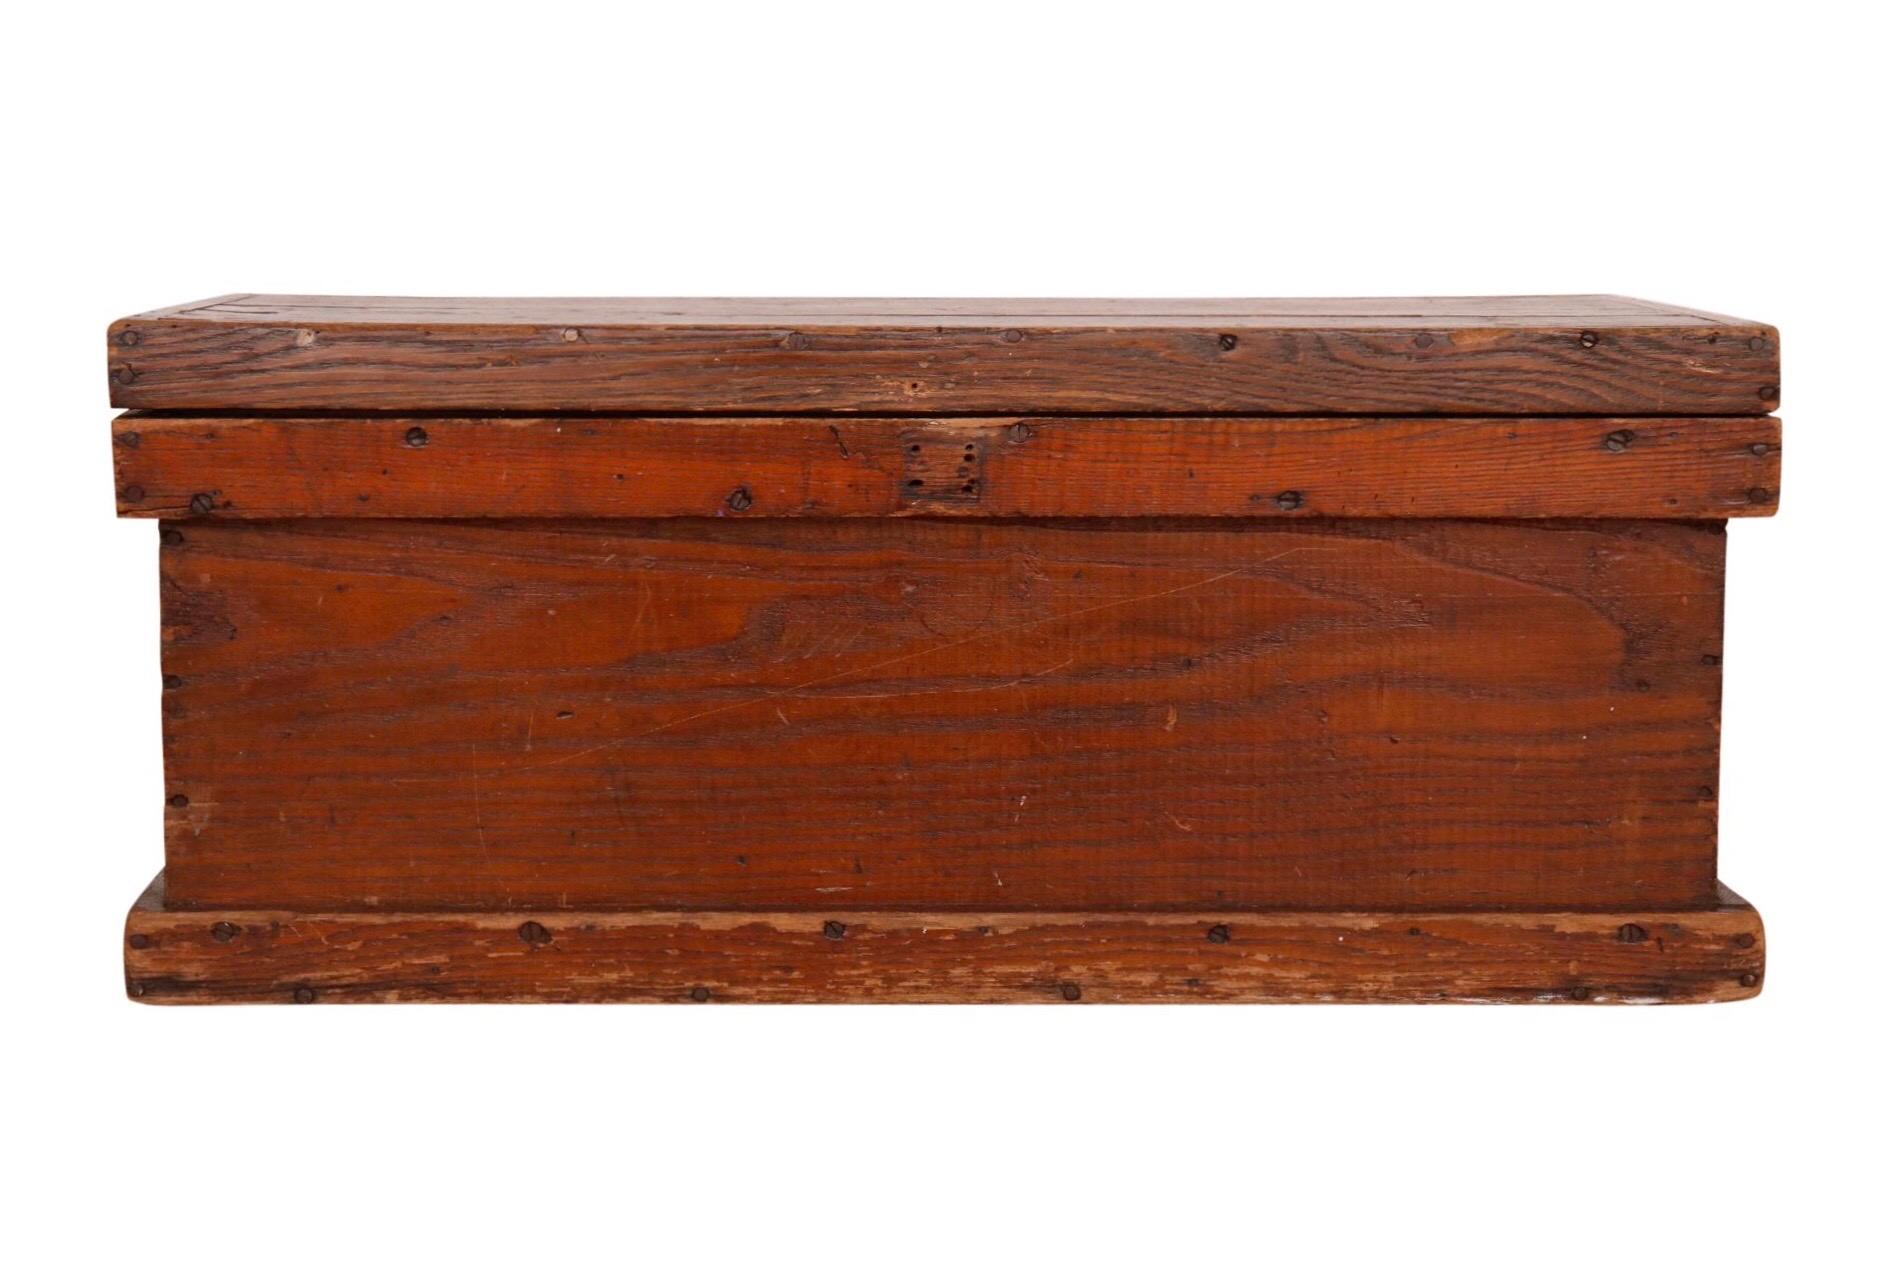 An antique blanket chest made of pine. Constructed with plank wood secured with nails. The lid hinges open to reveal storage.